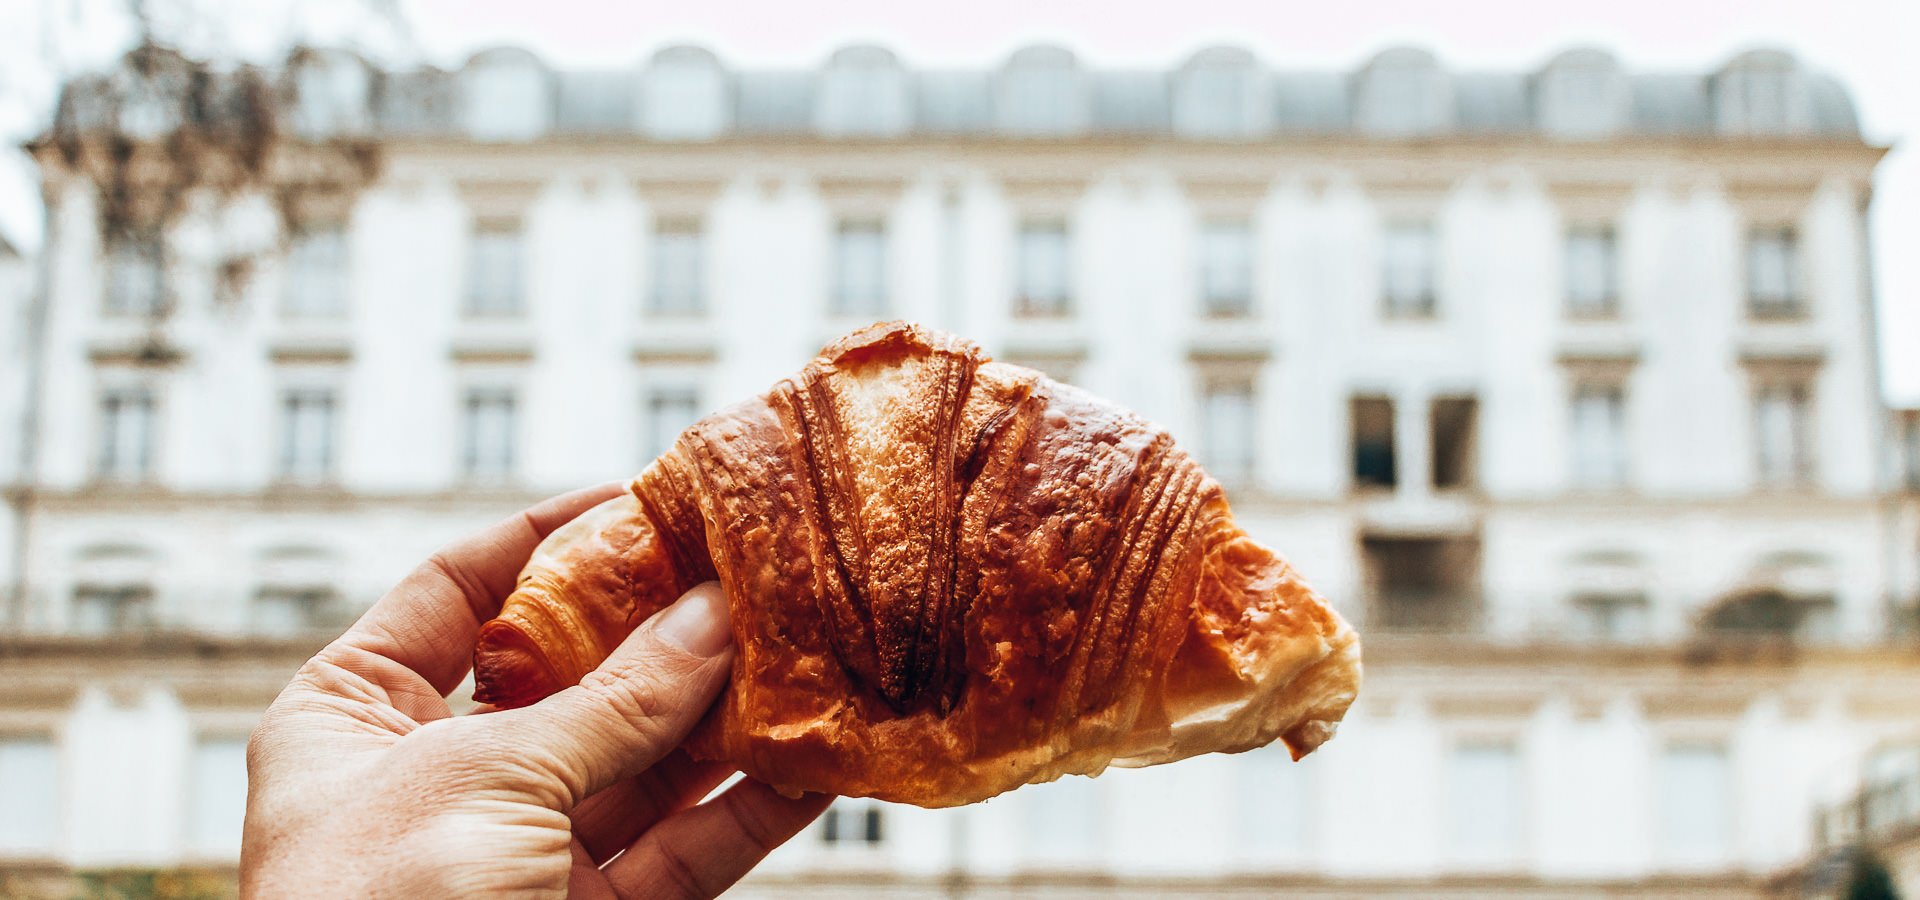 8 Of The Best Bakeries and Pâtisseries In Paris | dress for the italian riviera 4